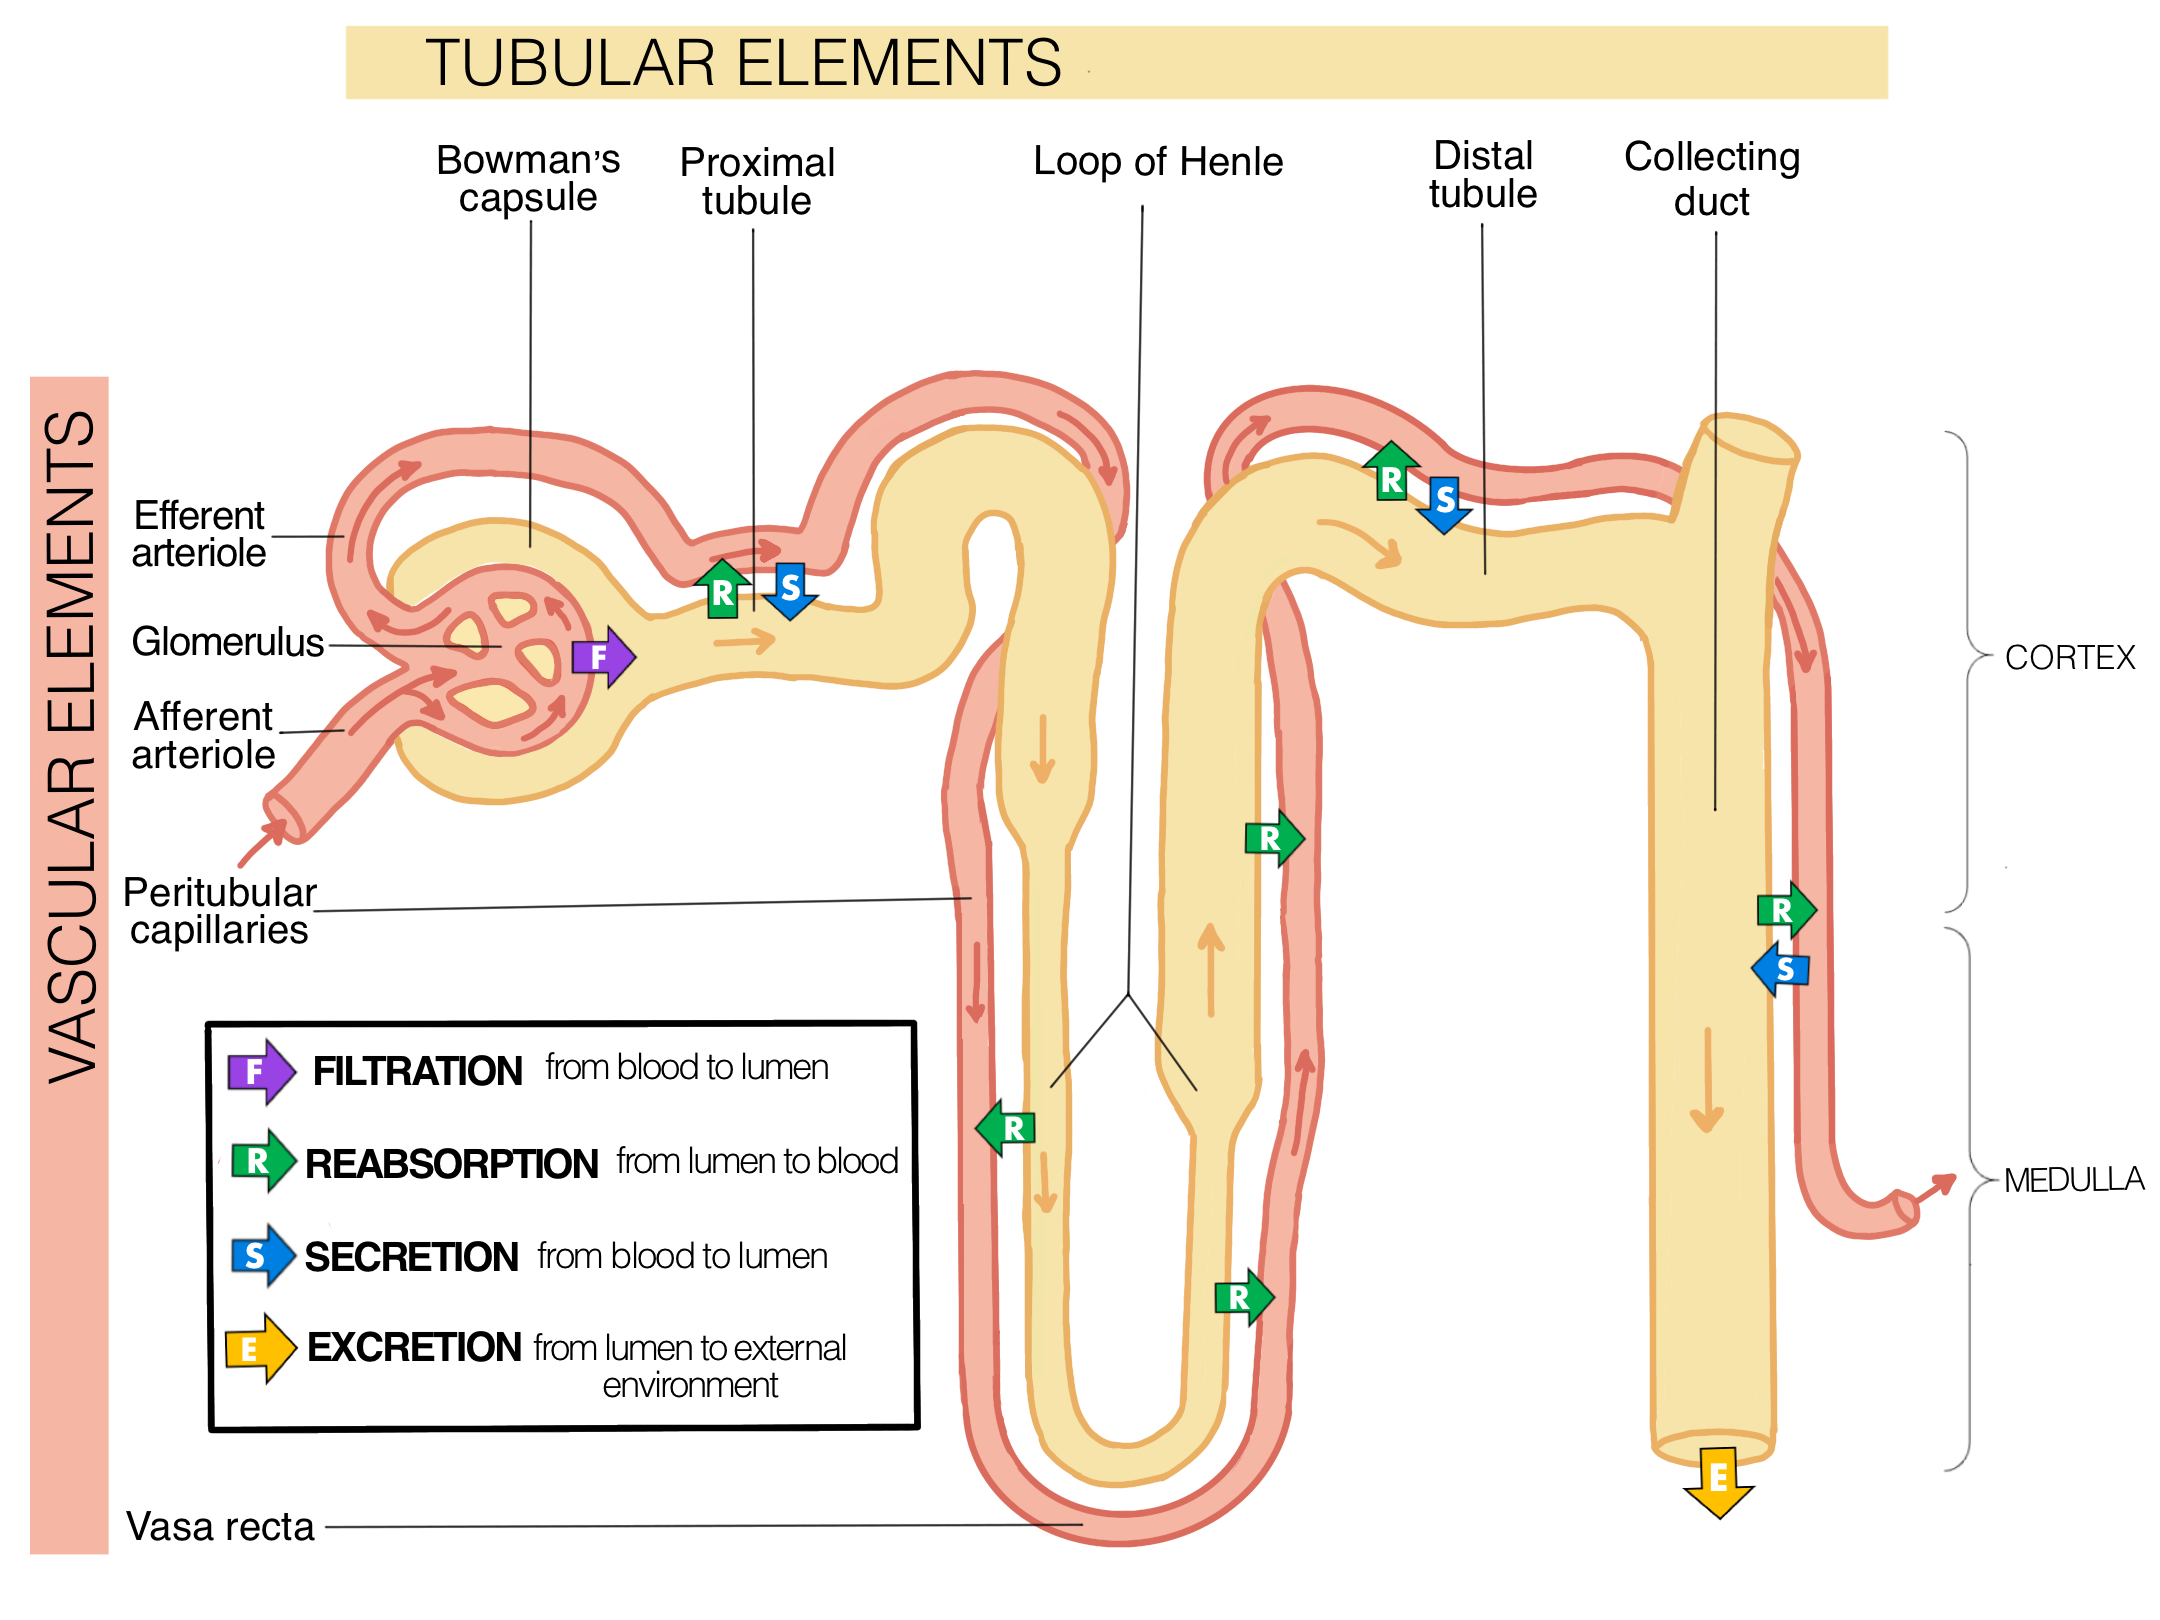 Filtration in the nephron occurs from the blood in the glomerulus into the lumen of the tubule at the Bowman’s capsule. Reabsorption of substances occurs from the lumen of the tubule into the blood and this occurs at the proximal tubule, loop of henle, distal tubule and collecting duct. Secretion is the movement of substances from the blood into the lumen of the tubule to be excreted and this occurs at the proximal tubule, distal tubule and collecting duct. Excretion is the movement of substances from the lumen of the tubule to the external environment and this occurs at the end of the collecting duct.